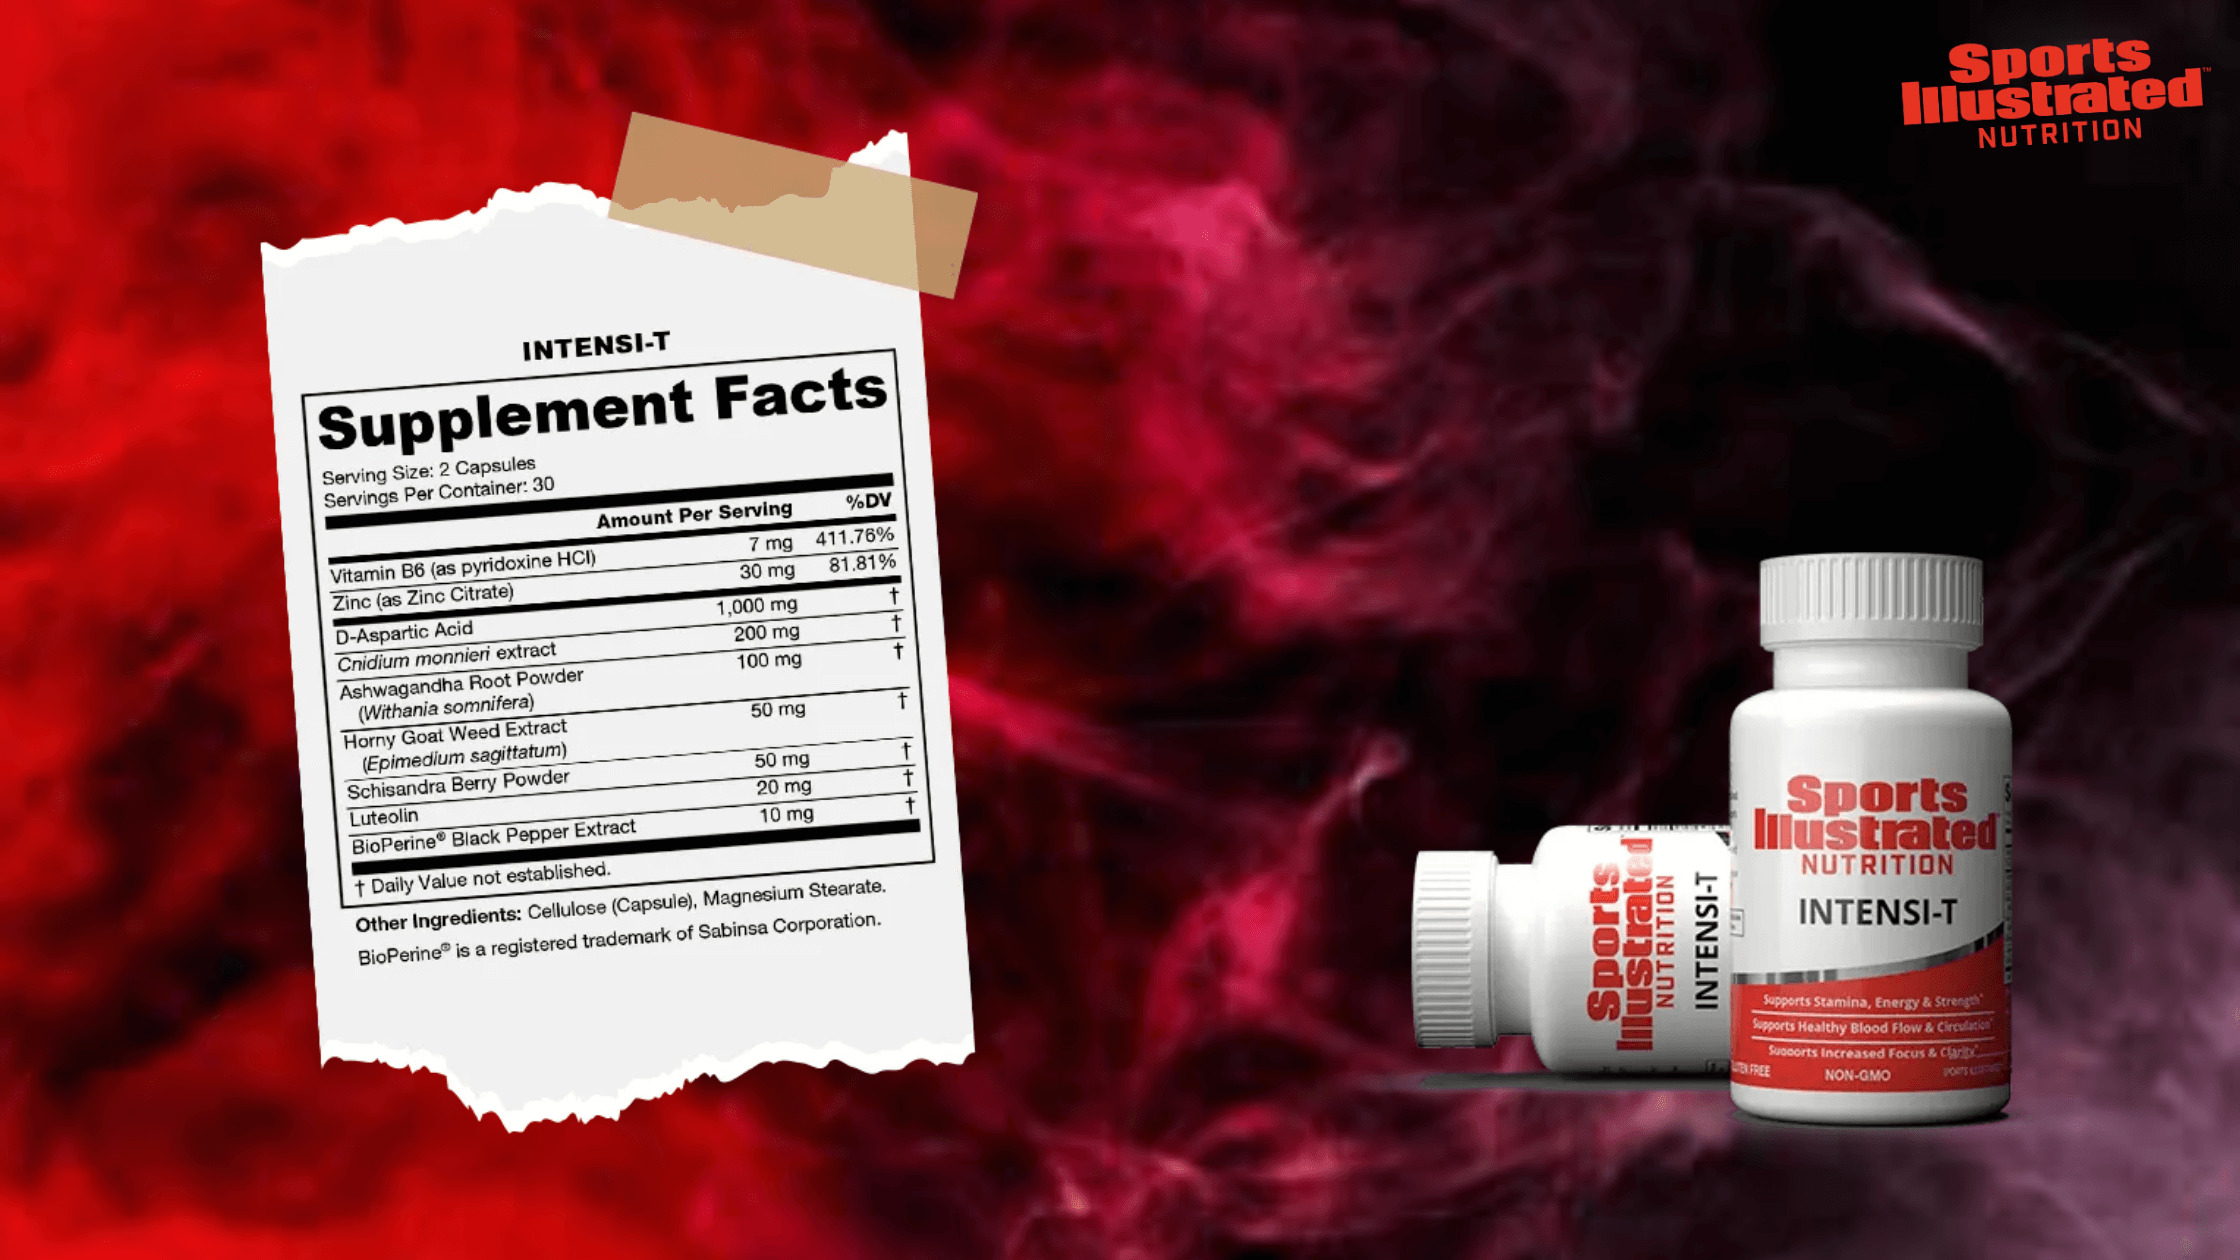 Intensi-T supplement facts